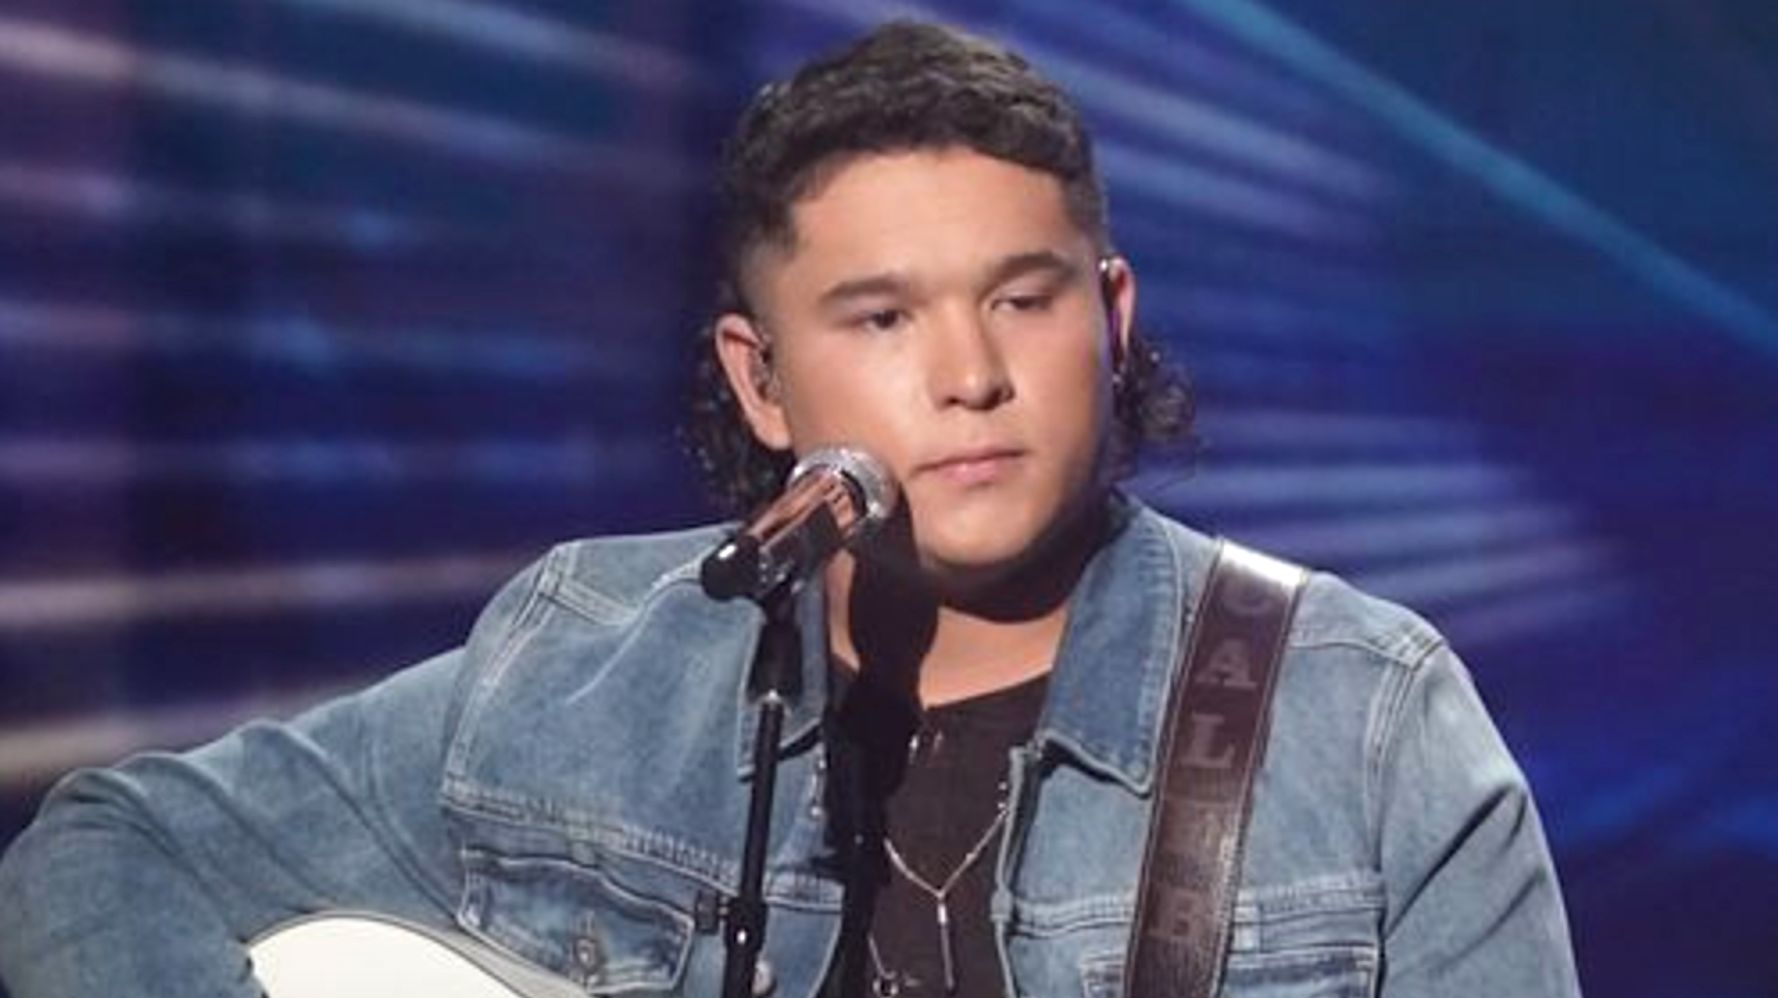 Caleb Kennedy Leaves 'American Idol' After Video With KKK-Style Hood Surfaces